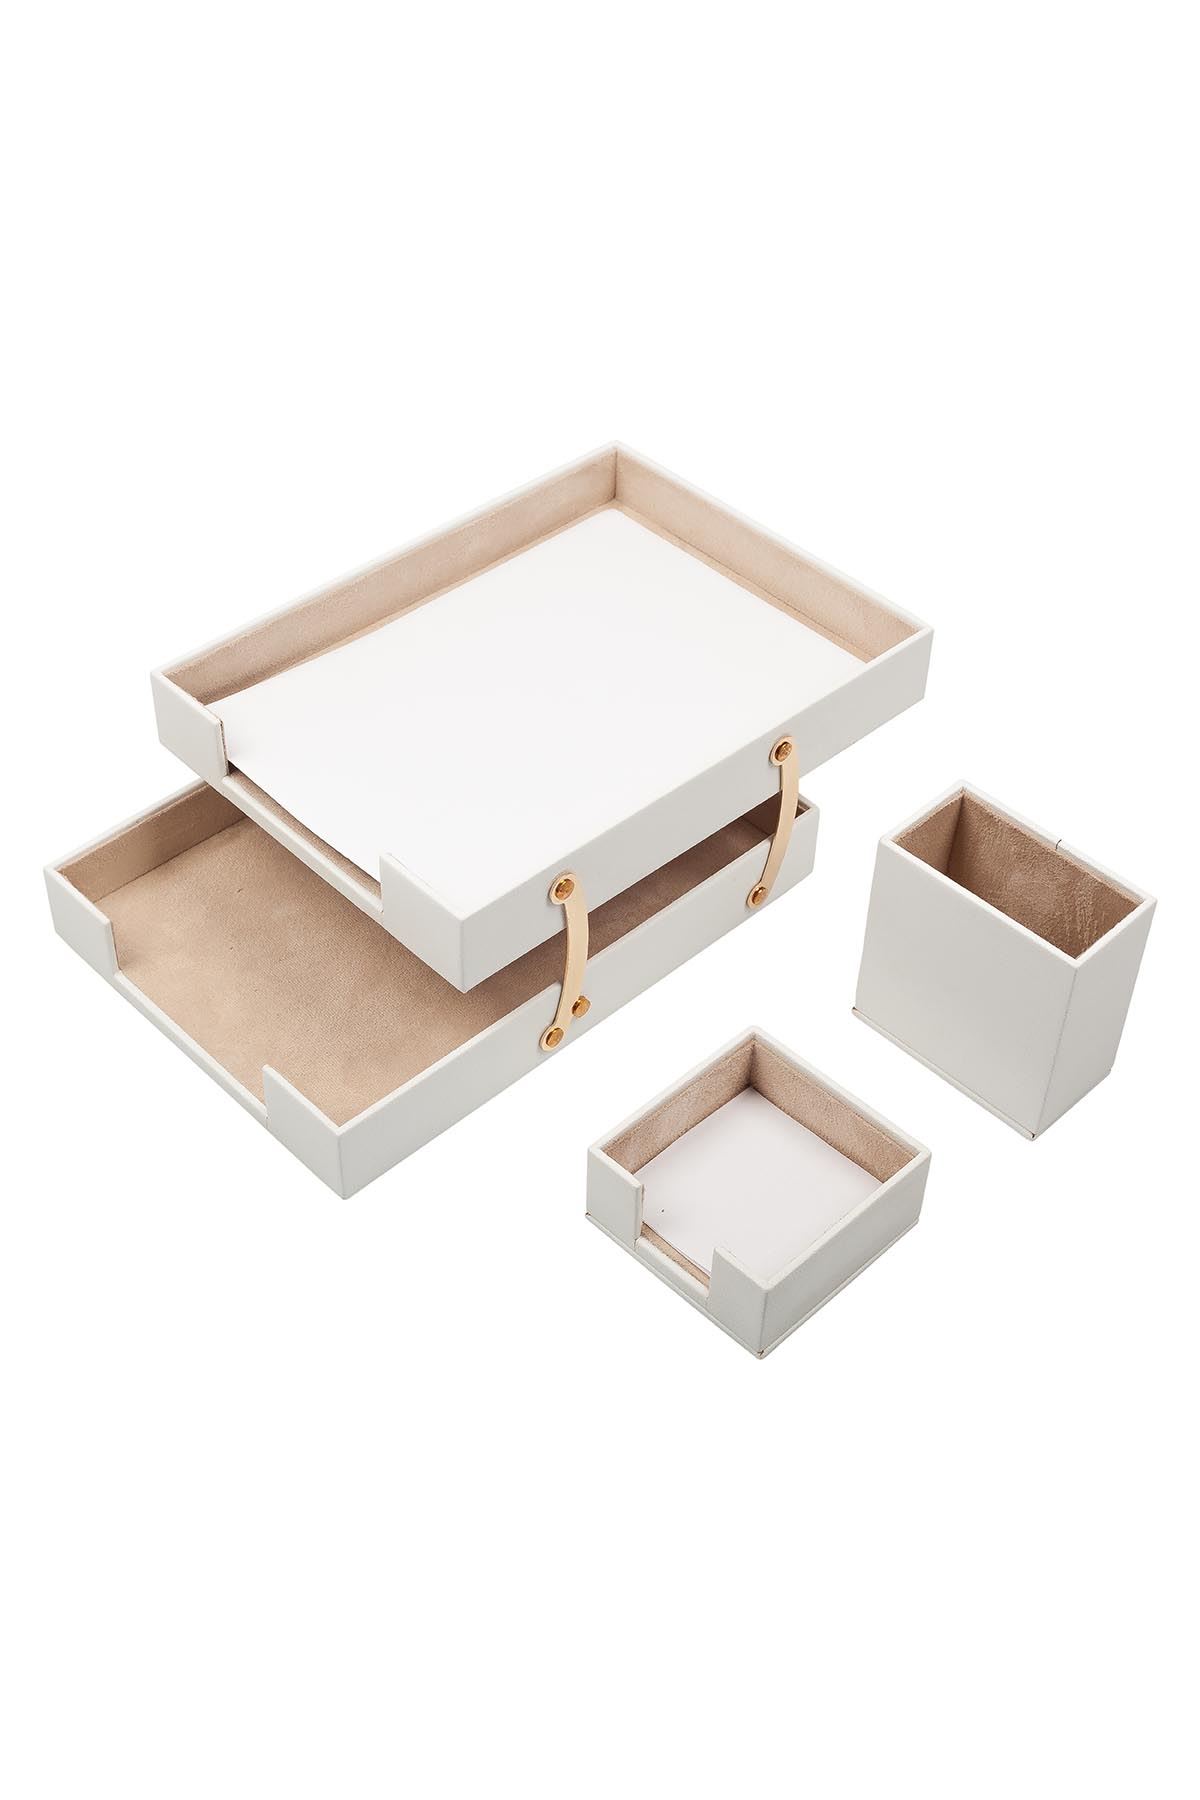 Double Document Tray With 2 Accessories White| Desk Set Accessories | Desktop Accessories | Desk Accessories | Desk Organizers